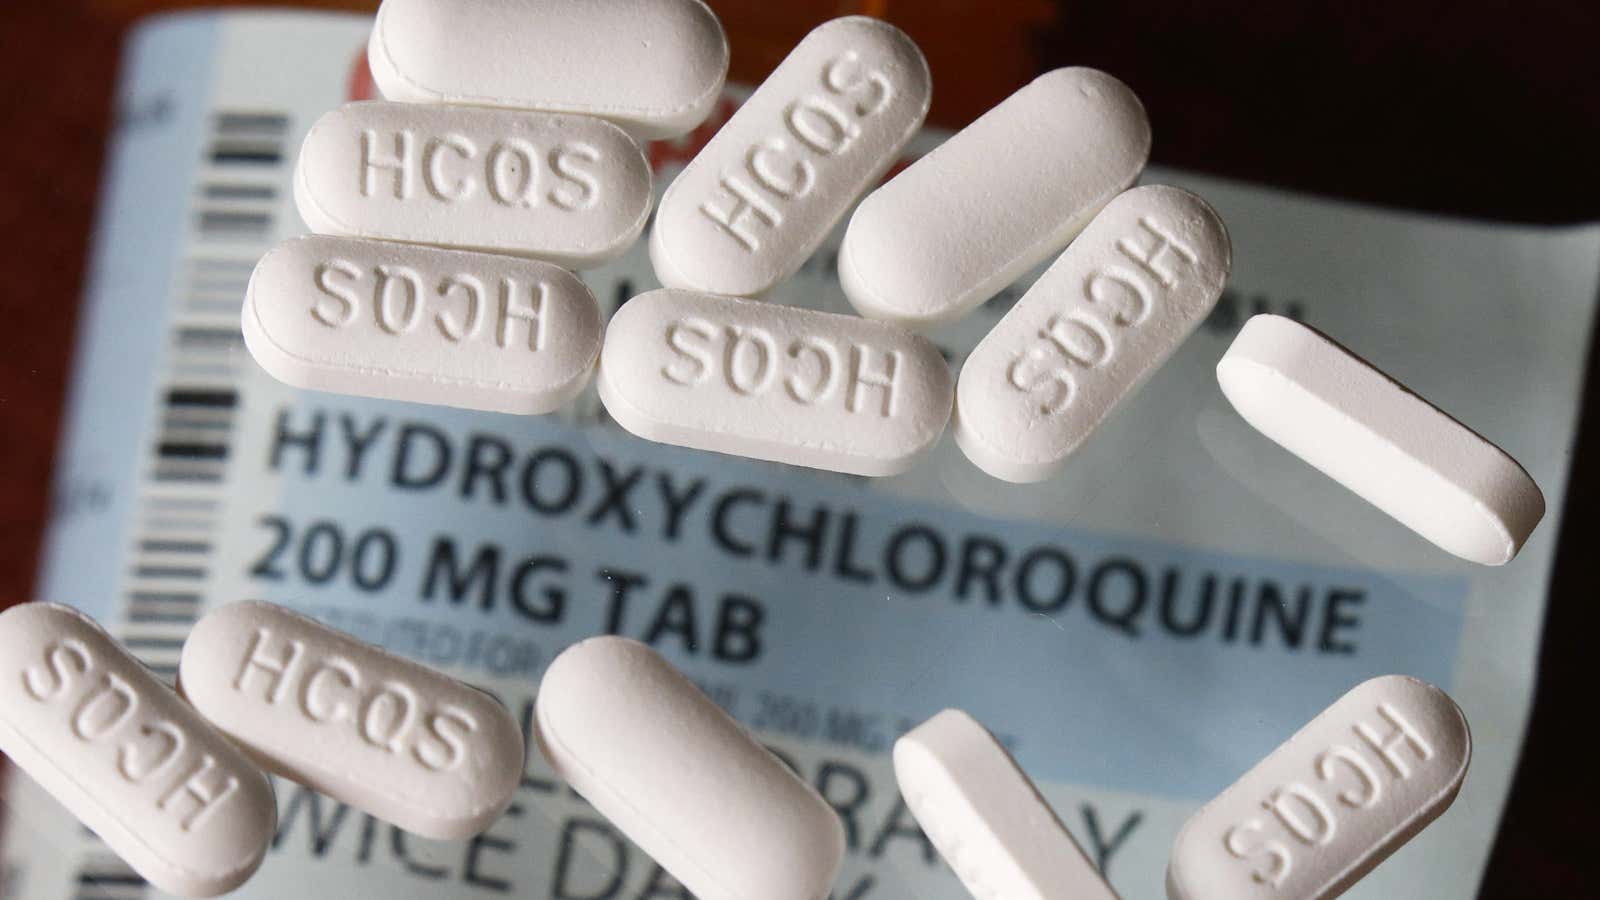 Hydroxychloroquine has been touted by US president Donald Trump.